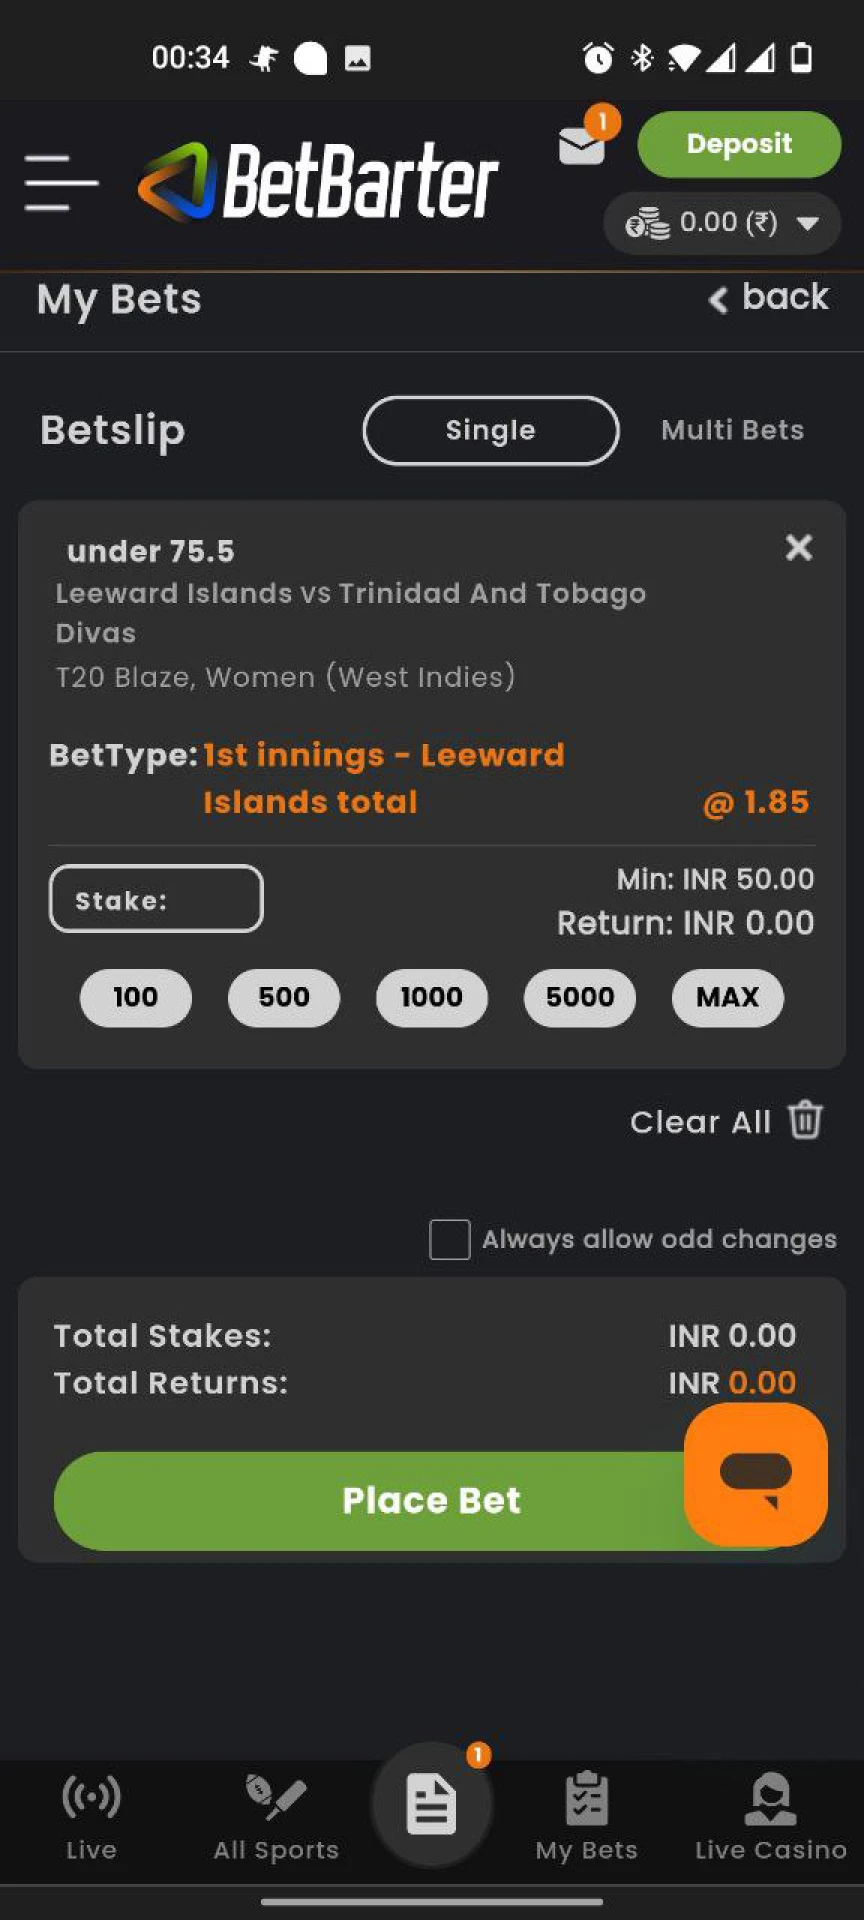 Choose any live IPL event to bet on on BetBarter.